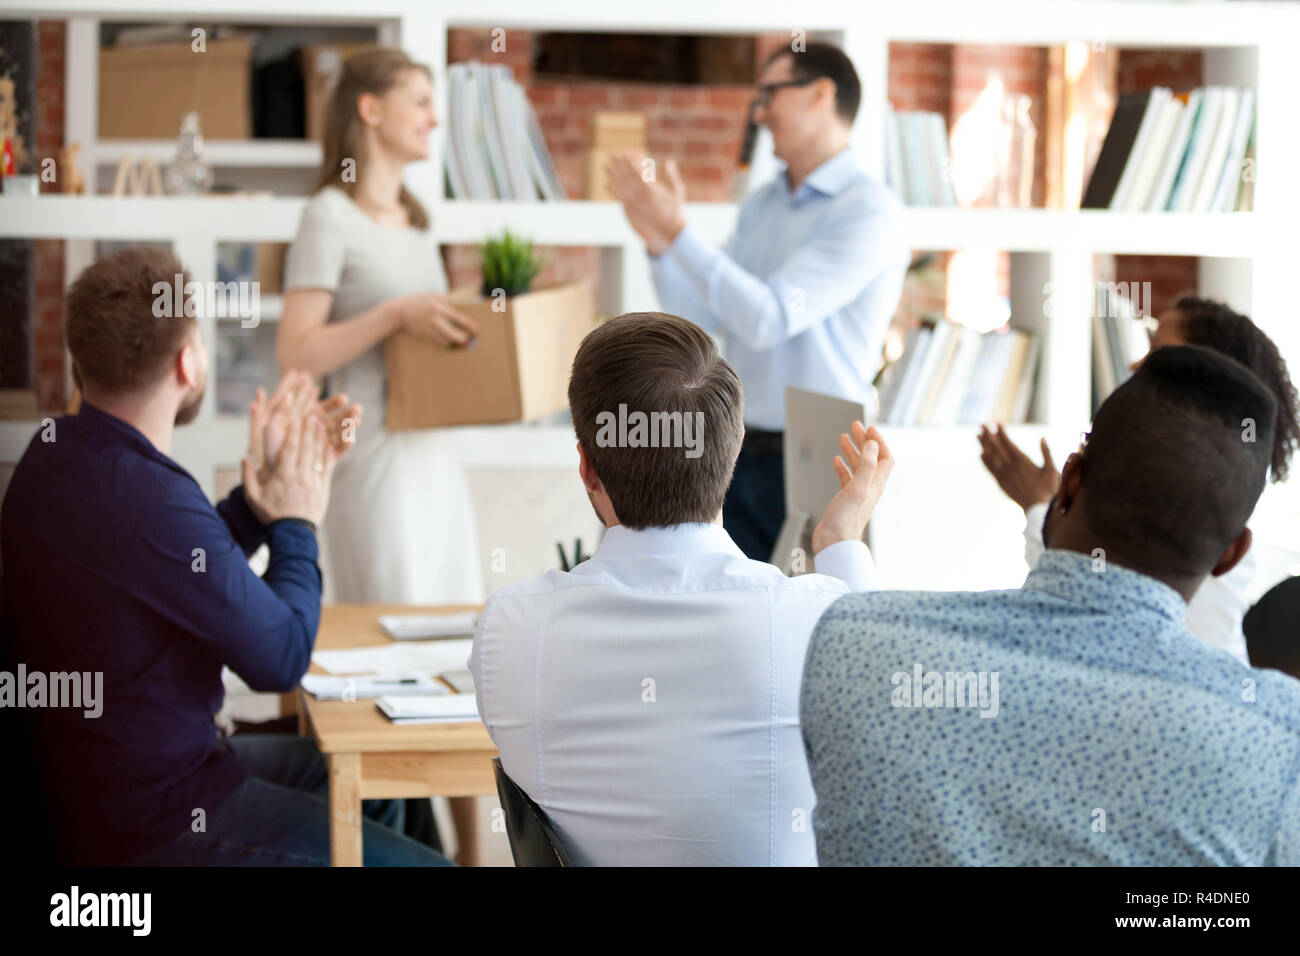 Team leader with colleagues applauding to just hired employee Stock Photo